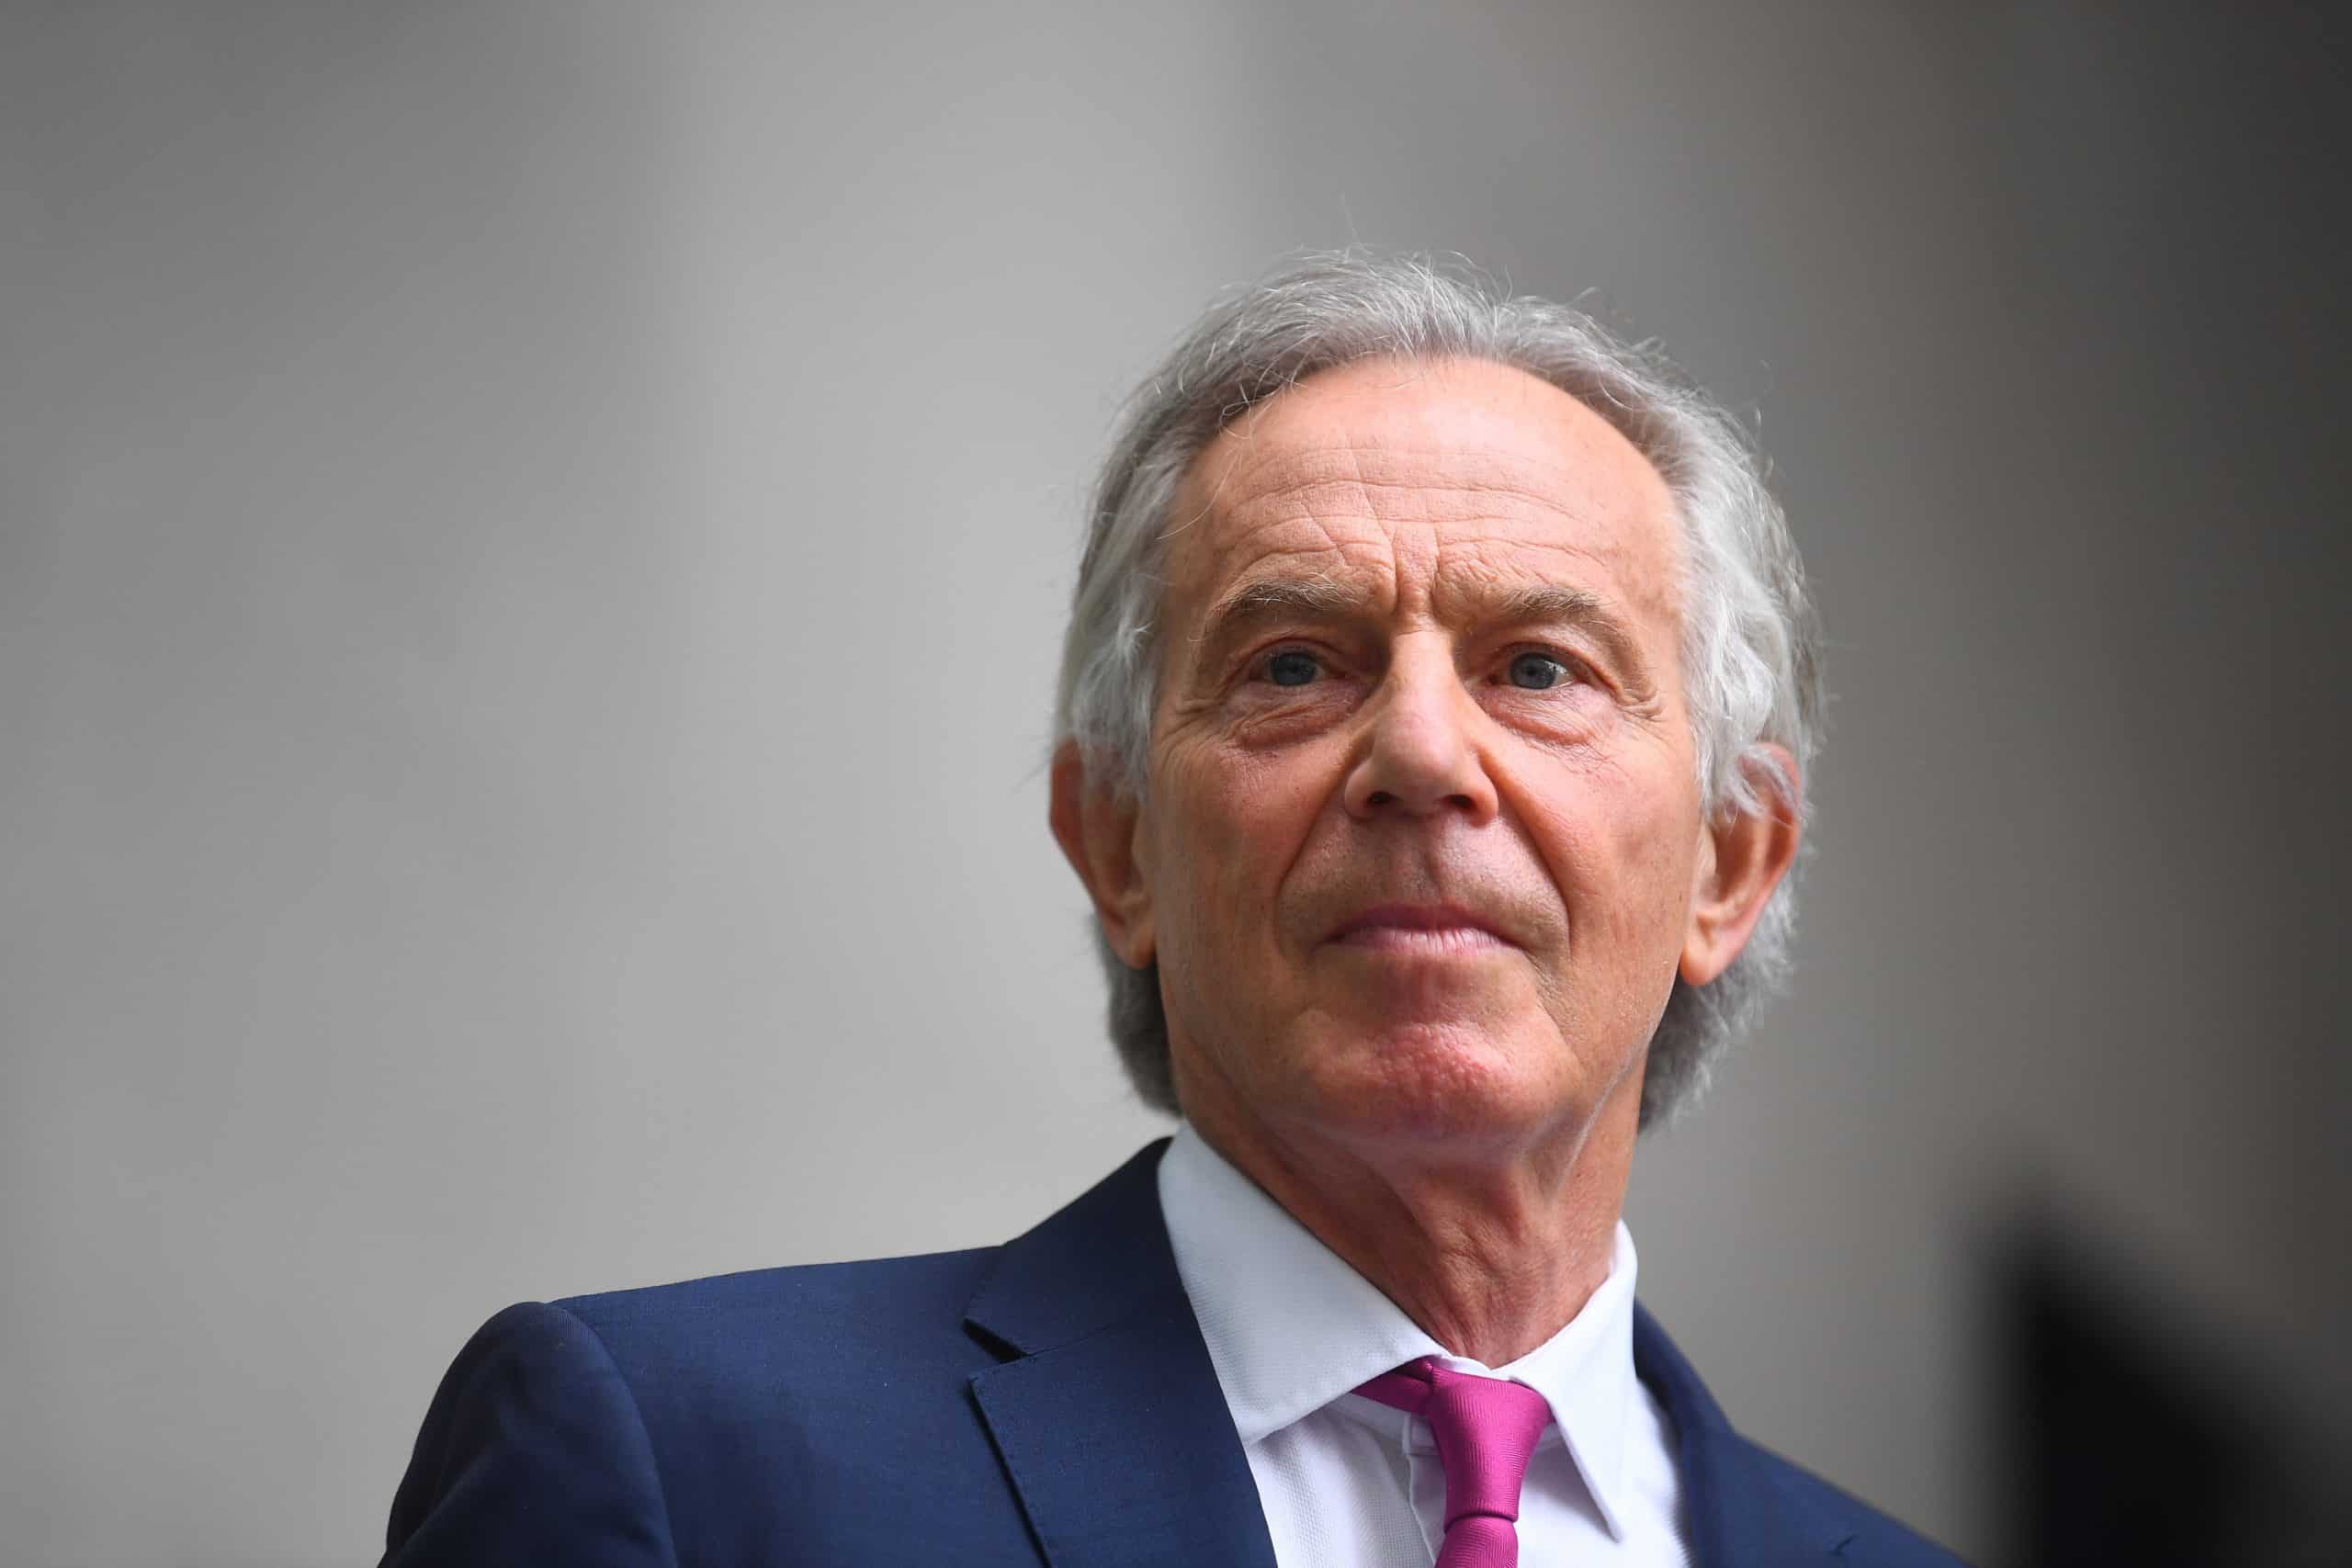 ‘Not sensible’ for UK to criticise Qatar over LGBT rights, says Tony Blair